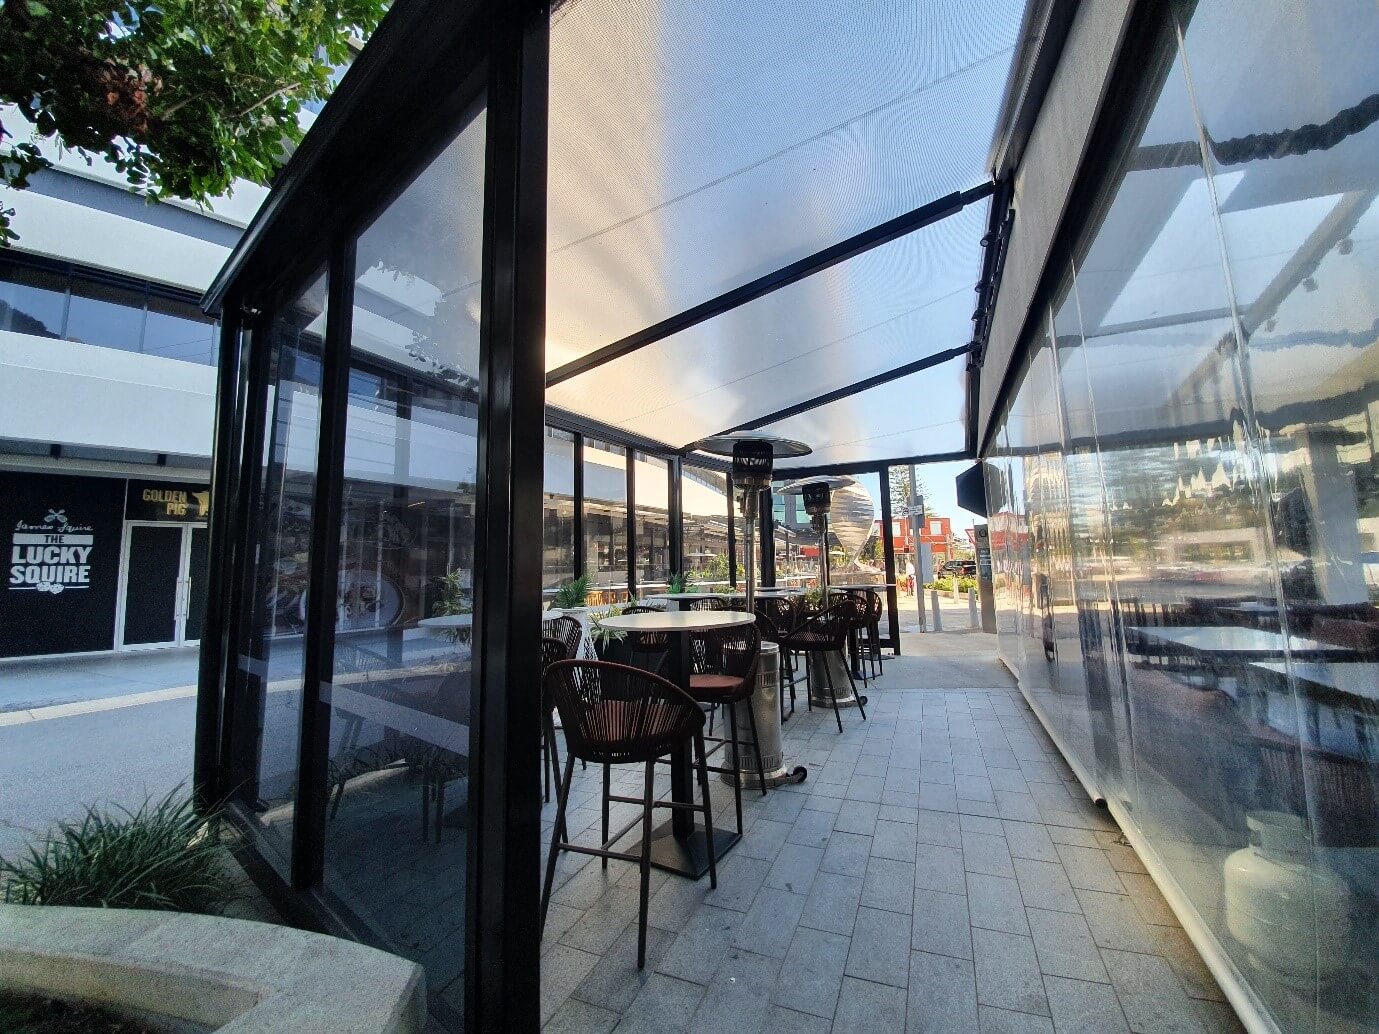 Restaurant waterproof structure designed, manufactured, and installed by Versatile Structures